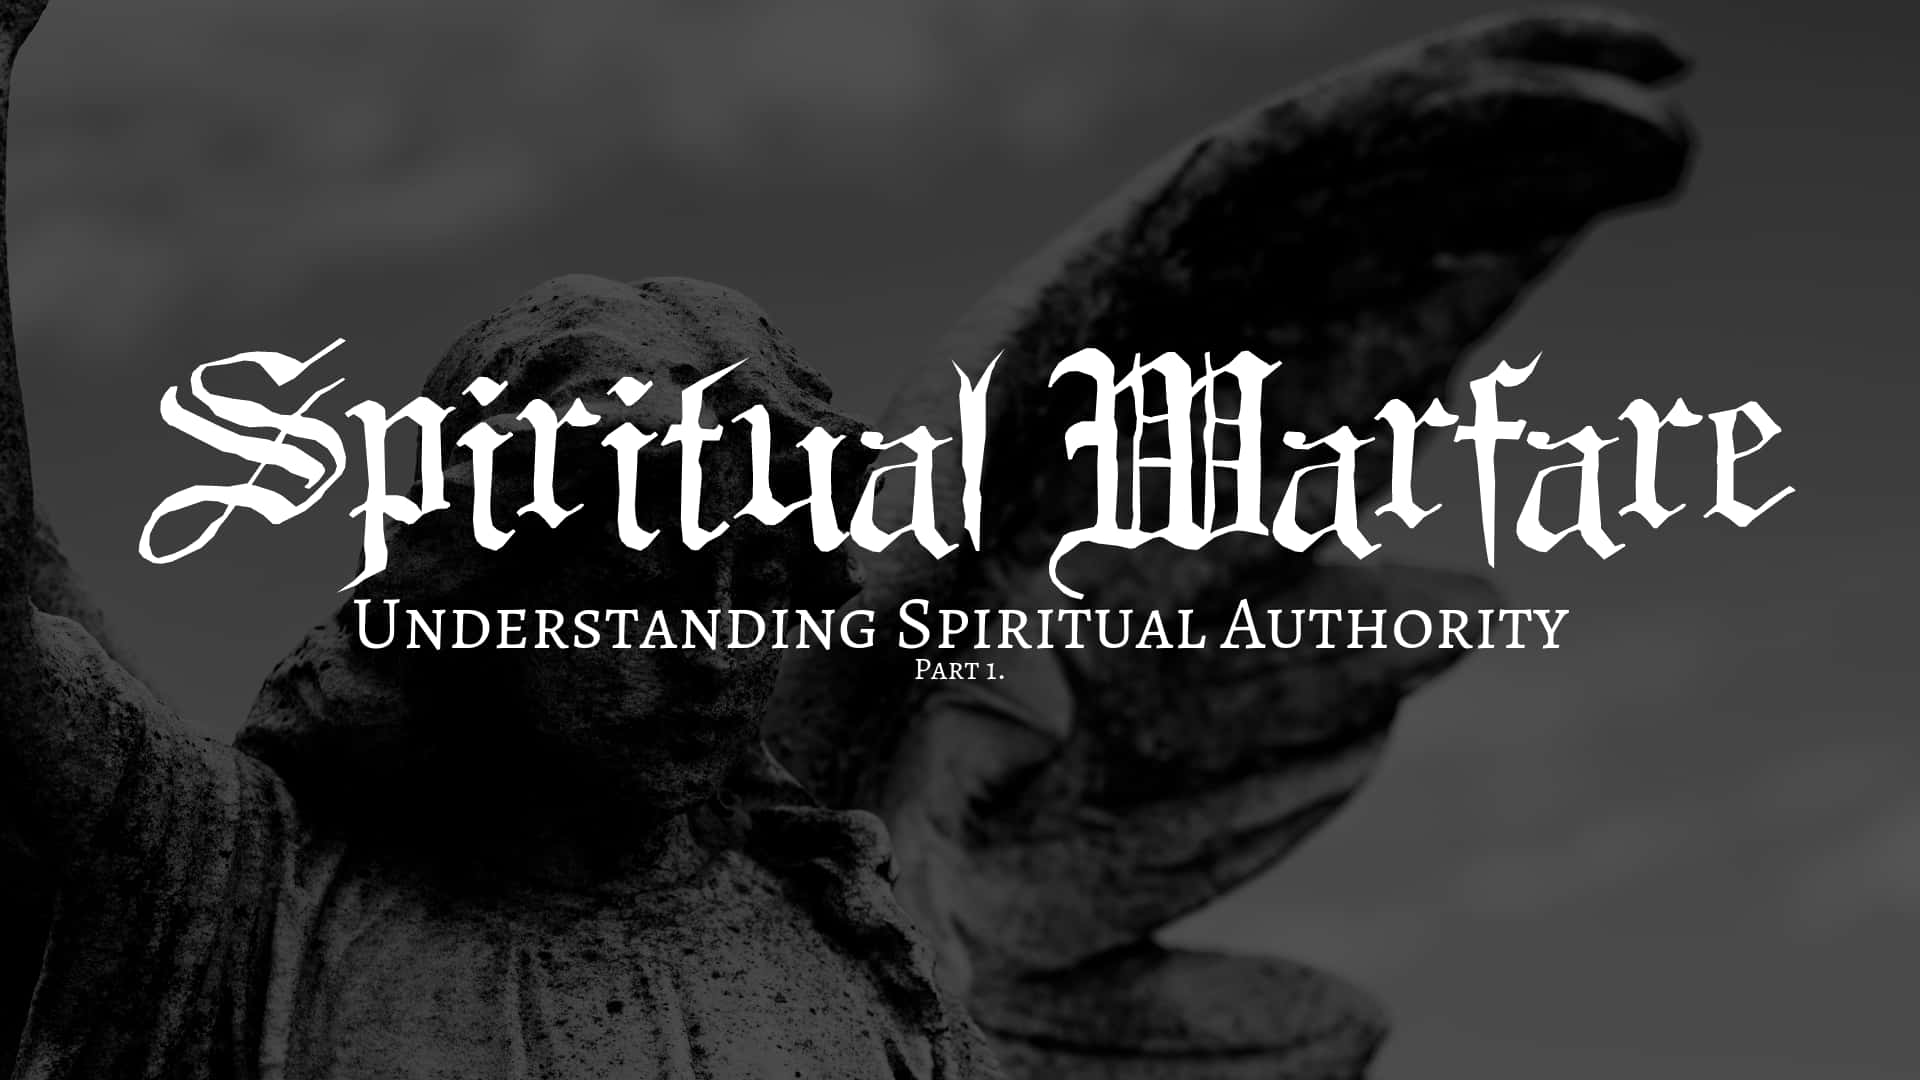 Spiritual Warfare: Referencing the inner strength and faith needed to carry on the fight against mental and spiritual struggles. Wallpaper